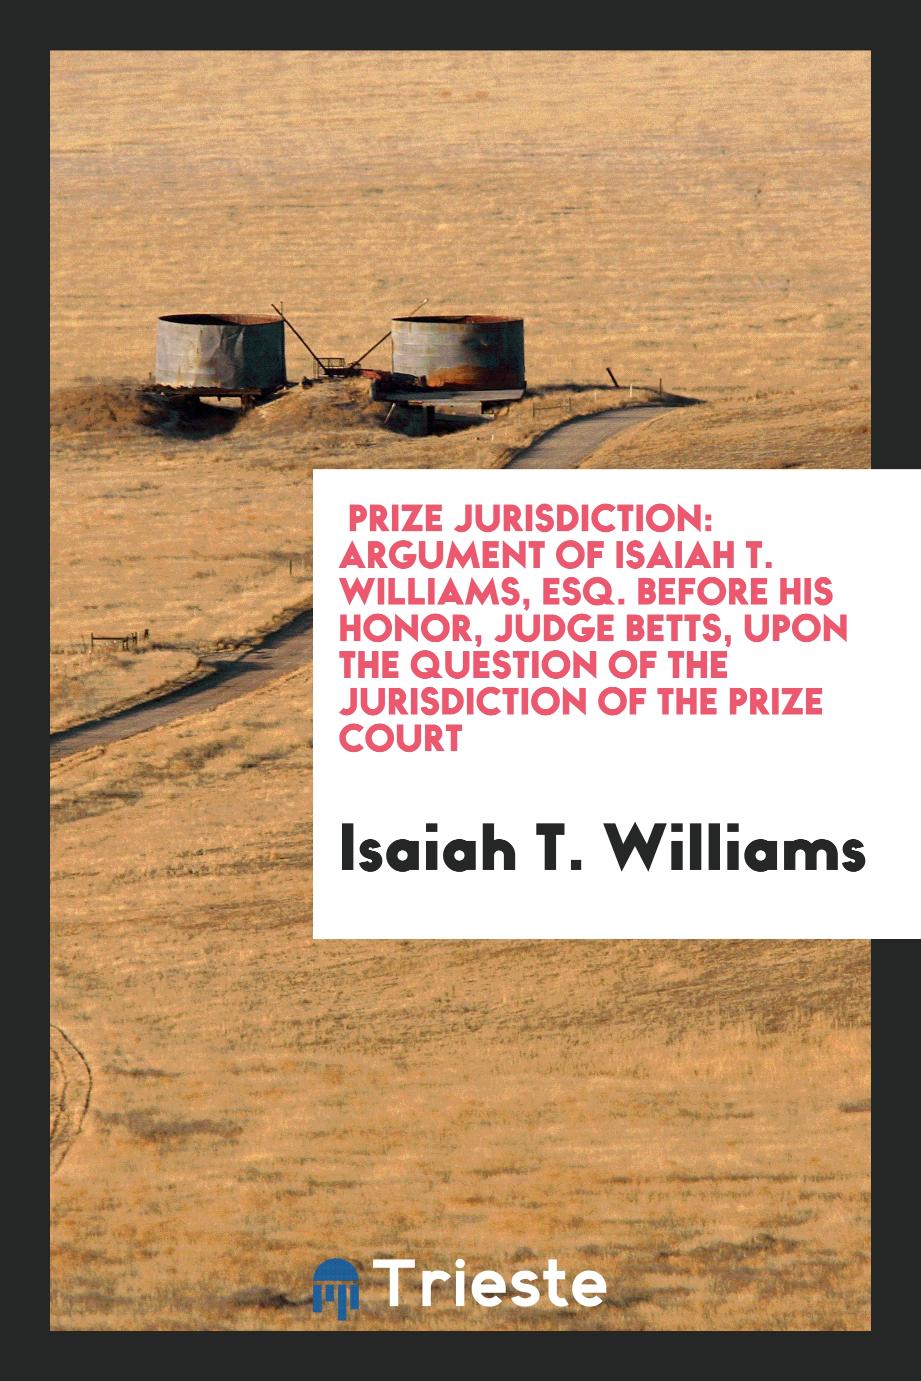 Prize Jurisdiction: Argument of Isaiah T. Williams, Esq. Before His Honor, Judge Betts, upon the question of the Jurisdiction of the prize court